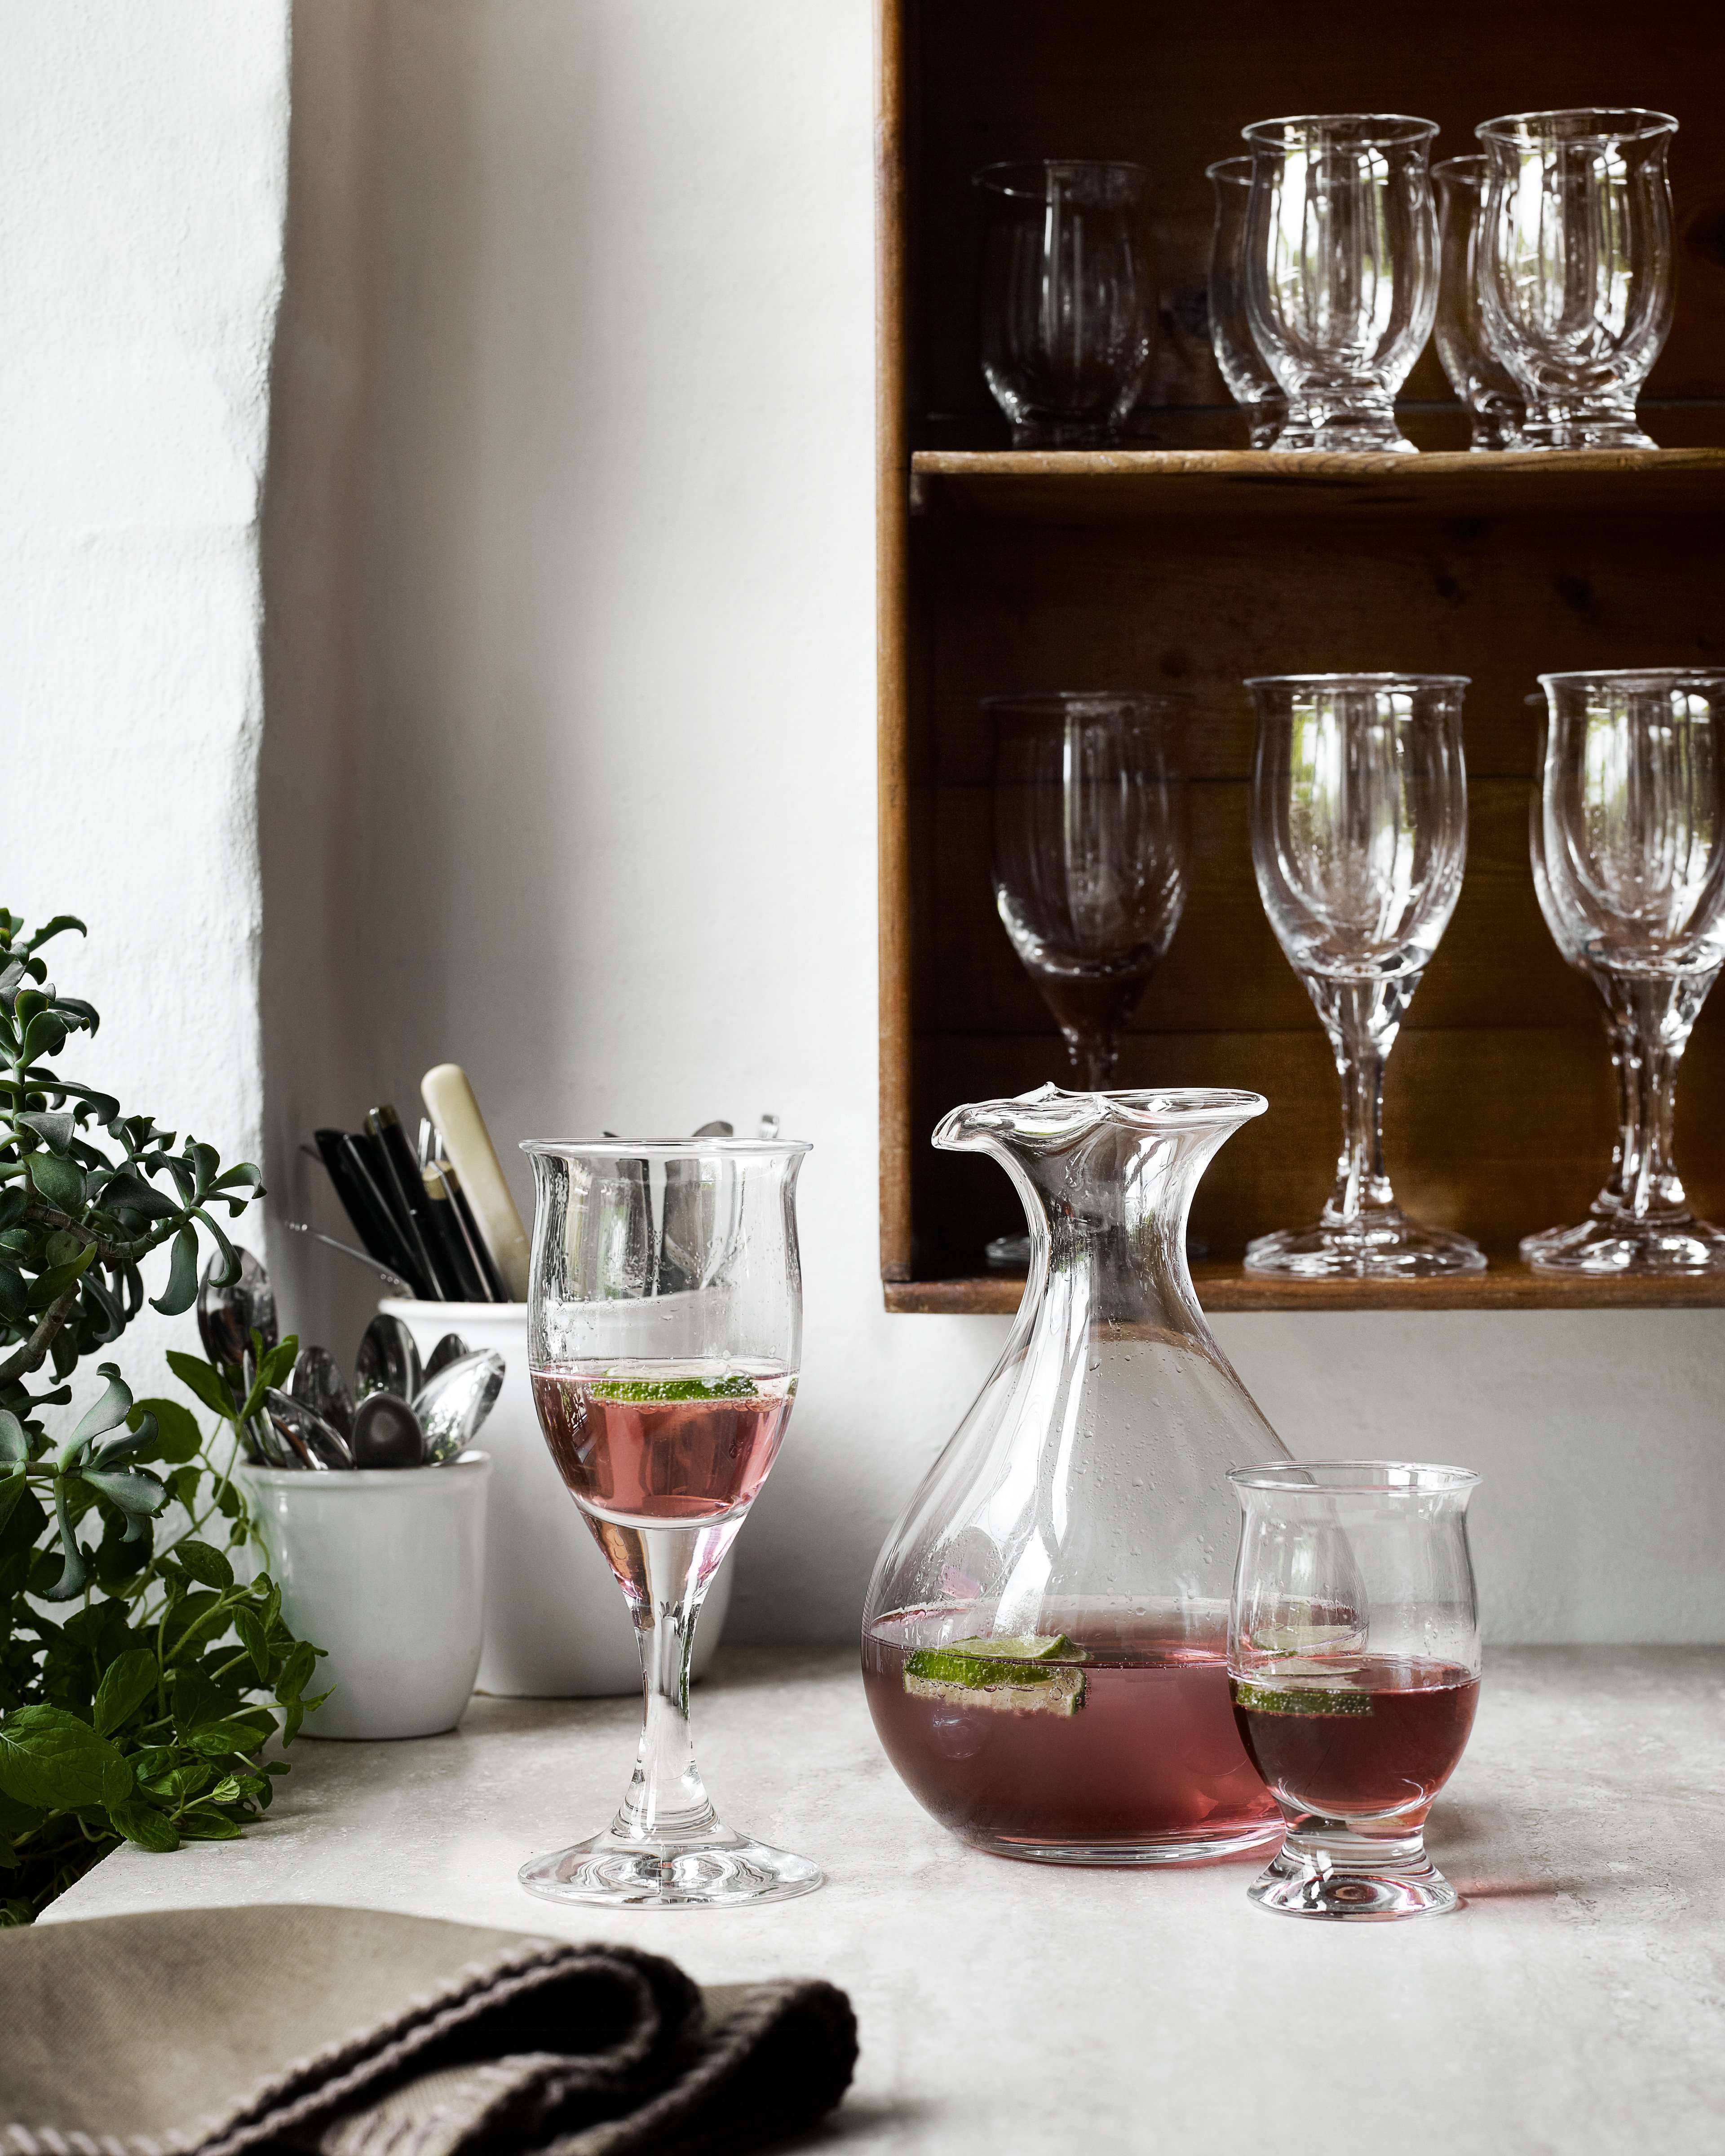 Wine and water glasses from the Holmegaard Ideélle series